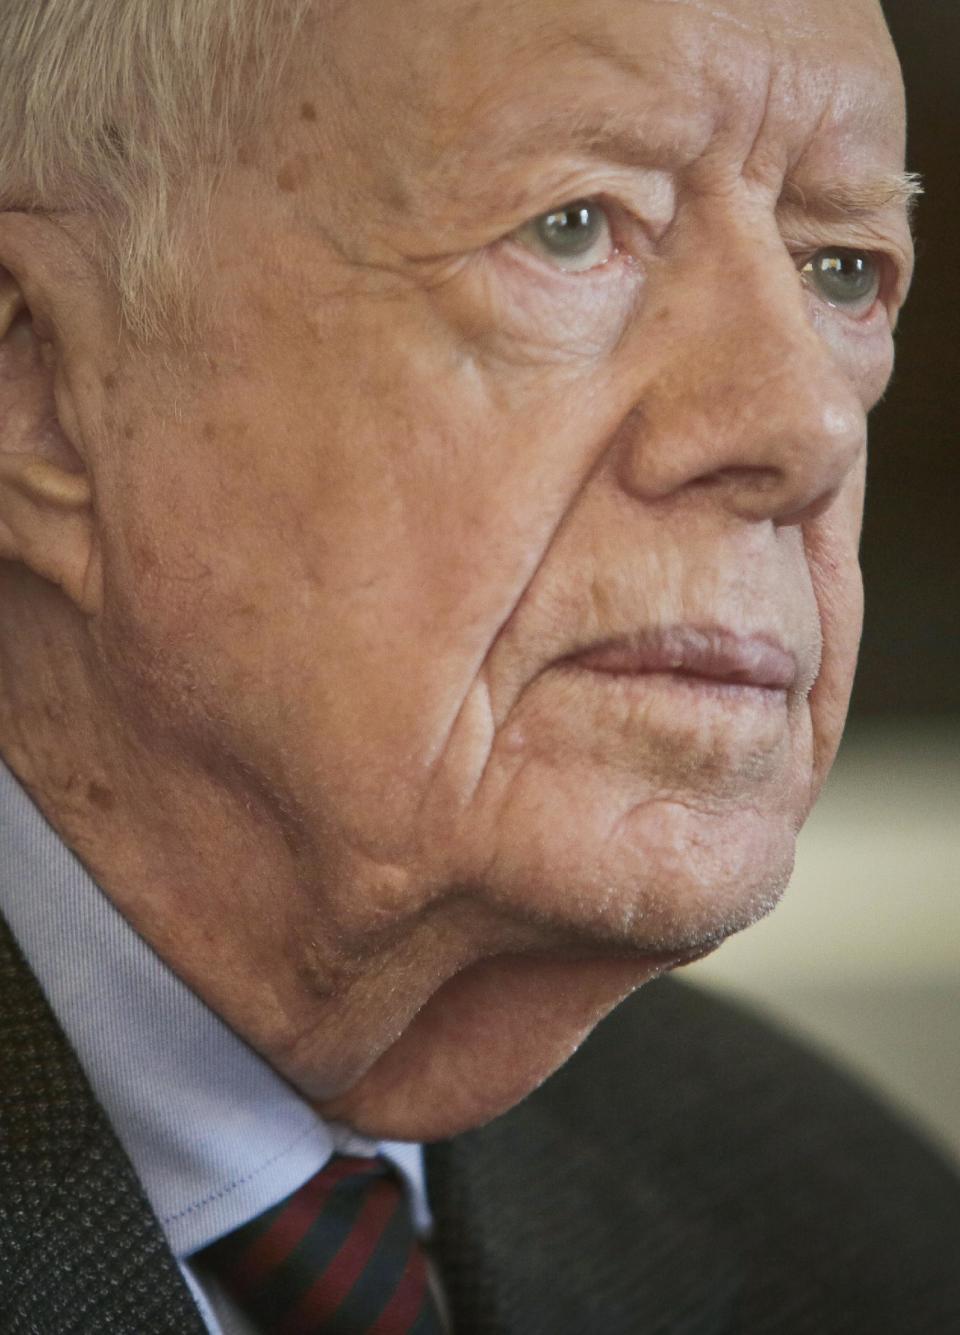 Former U.S. President Jimmy Carter listens during an interview on Monday March 24, 2014 in New York. Carter said Monday that he doesn't support the Palestinian-led "boycott, divest, sanction" campaign against Israel but said products made in Israel-occupied Palestinian territories should be clearly labeled so buyers can make a choice about them. (AP Photo/Bebeto Matthews)